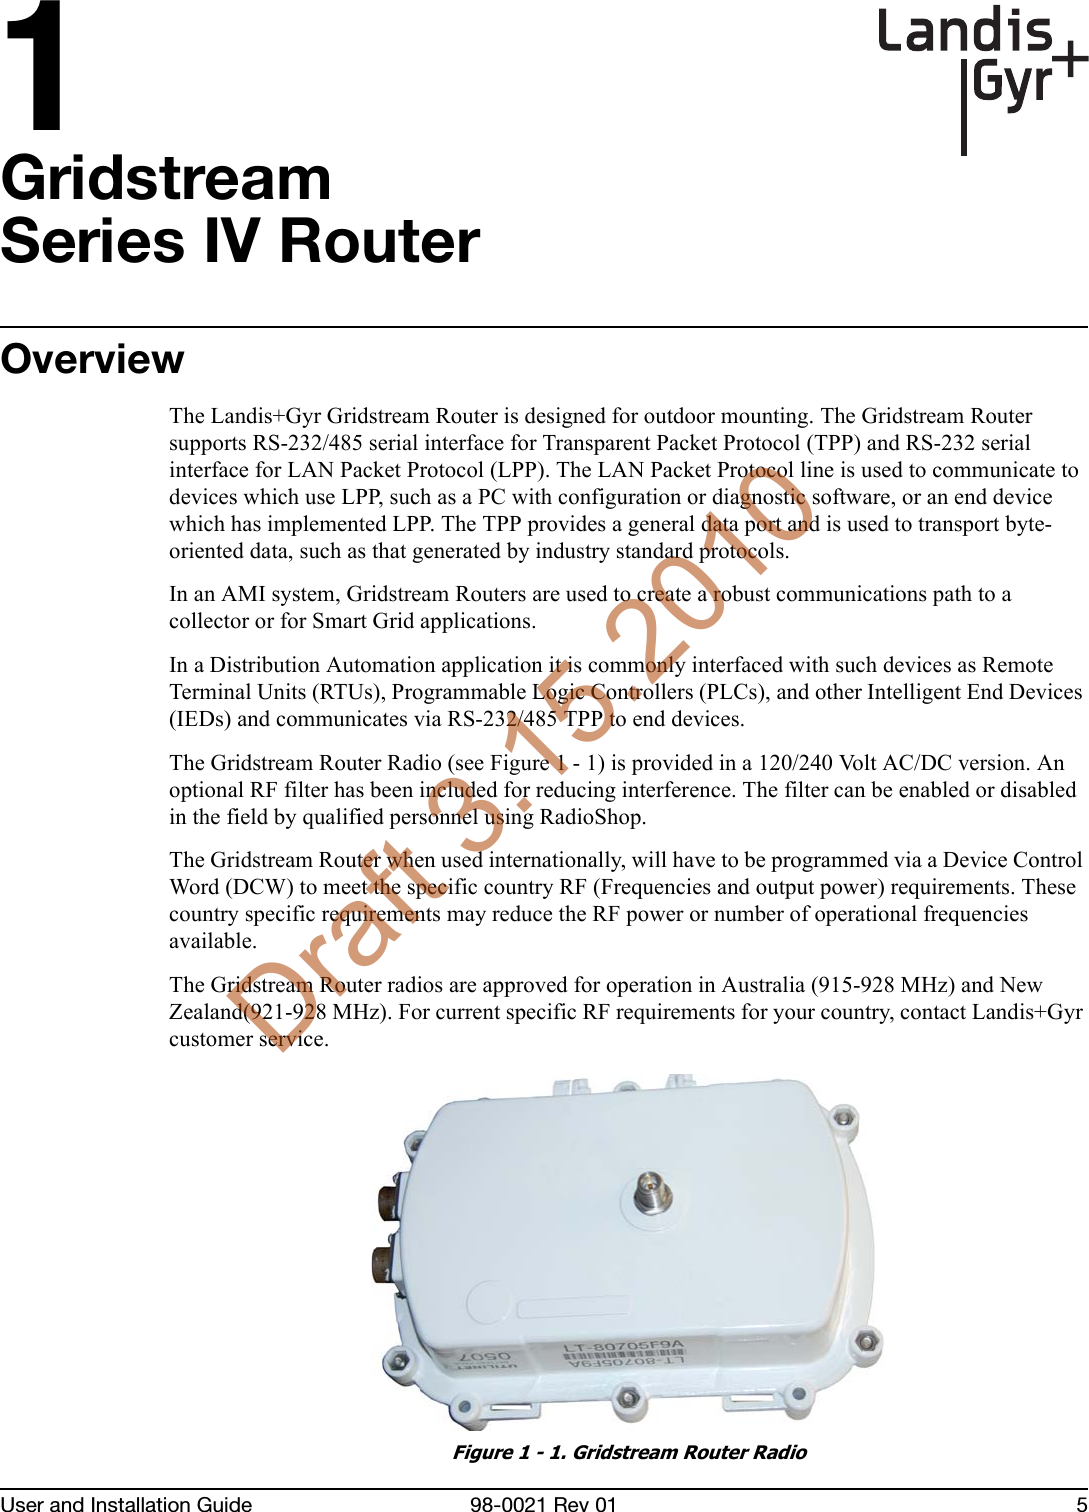 1User and Installation Guide 98-0021 Rev 01 5GridstreamSeries IV RouterOverviewThe Landis+Gyr Gridstream Router is designed for outdoor mounting. The Gridstream Router supports RS-232/485 serial interface for Transparent Packet Protocol (TPP) and RS-232 serial interface for LAN Packet Protocol (LPP). The LAN Packet Protocol line is used to communicate to devices which use LPP, such as a PC with configuration or diagnostic software, or an end device which has implemented LPP. The TPP provides a general data port and is used to transport byte-oriented data, such as that generated by industry standard protocols.In an AMI system, Gridstream Routers are used to create a robust communications path to a collector or for Smart Grid applications. In a Distribution Automation application it is commonly interfaced with such devices as Remote Terminal Units (RTUs), Programmable Logic Controllers (PLCs), and other Intelligent End Devices (IEDs) and communicates via RS-232/485 TPP to end devices. The Gridstream Router Radio (see Figure 1 - 1) is provided in a 120/240 Volt AC/DC version. An optional RF filter has been included for reducing interference. The filter can be enabled or disabled in the field by qualified personnel using RadioShop. The Gridstream Router when used internationally, will have to be programmed via a Device Control Word (DCW) to meet the specific country RF (Frequencies and output power) requirements. These country specific requirements may reduce the RF power or number of operational frequencies available.The Gridstream Router radios are approved for operation in Australia (915-928 MHz) and New Zealand(921-928 MHz). For current specific RF requirements for your country, contact Landis+Gyr customer service.Figure 1 - 1. Gridstream Router RadioDraft 3.15.2010